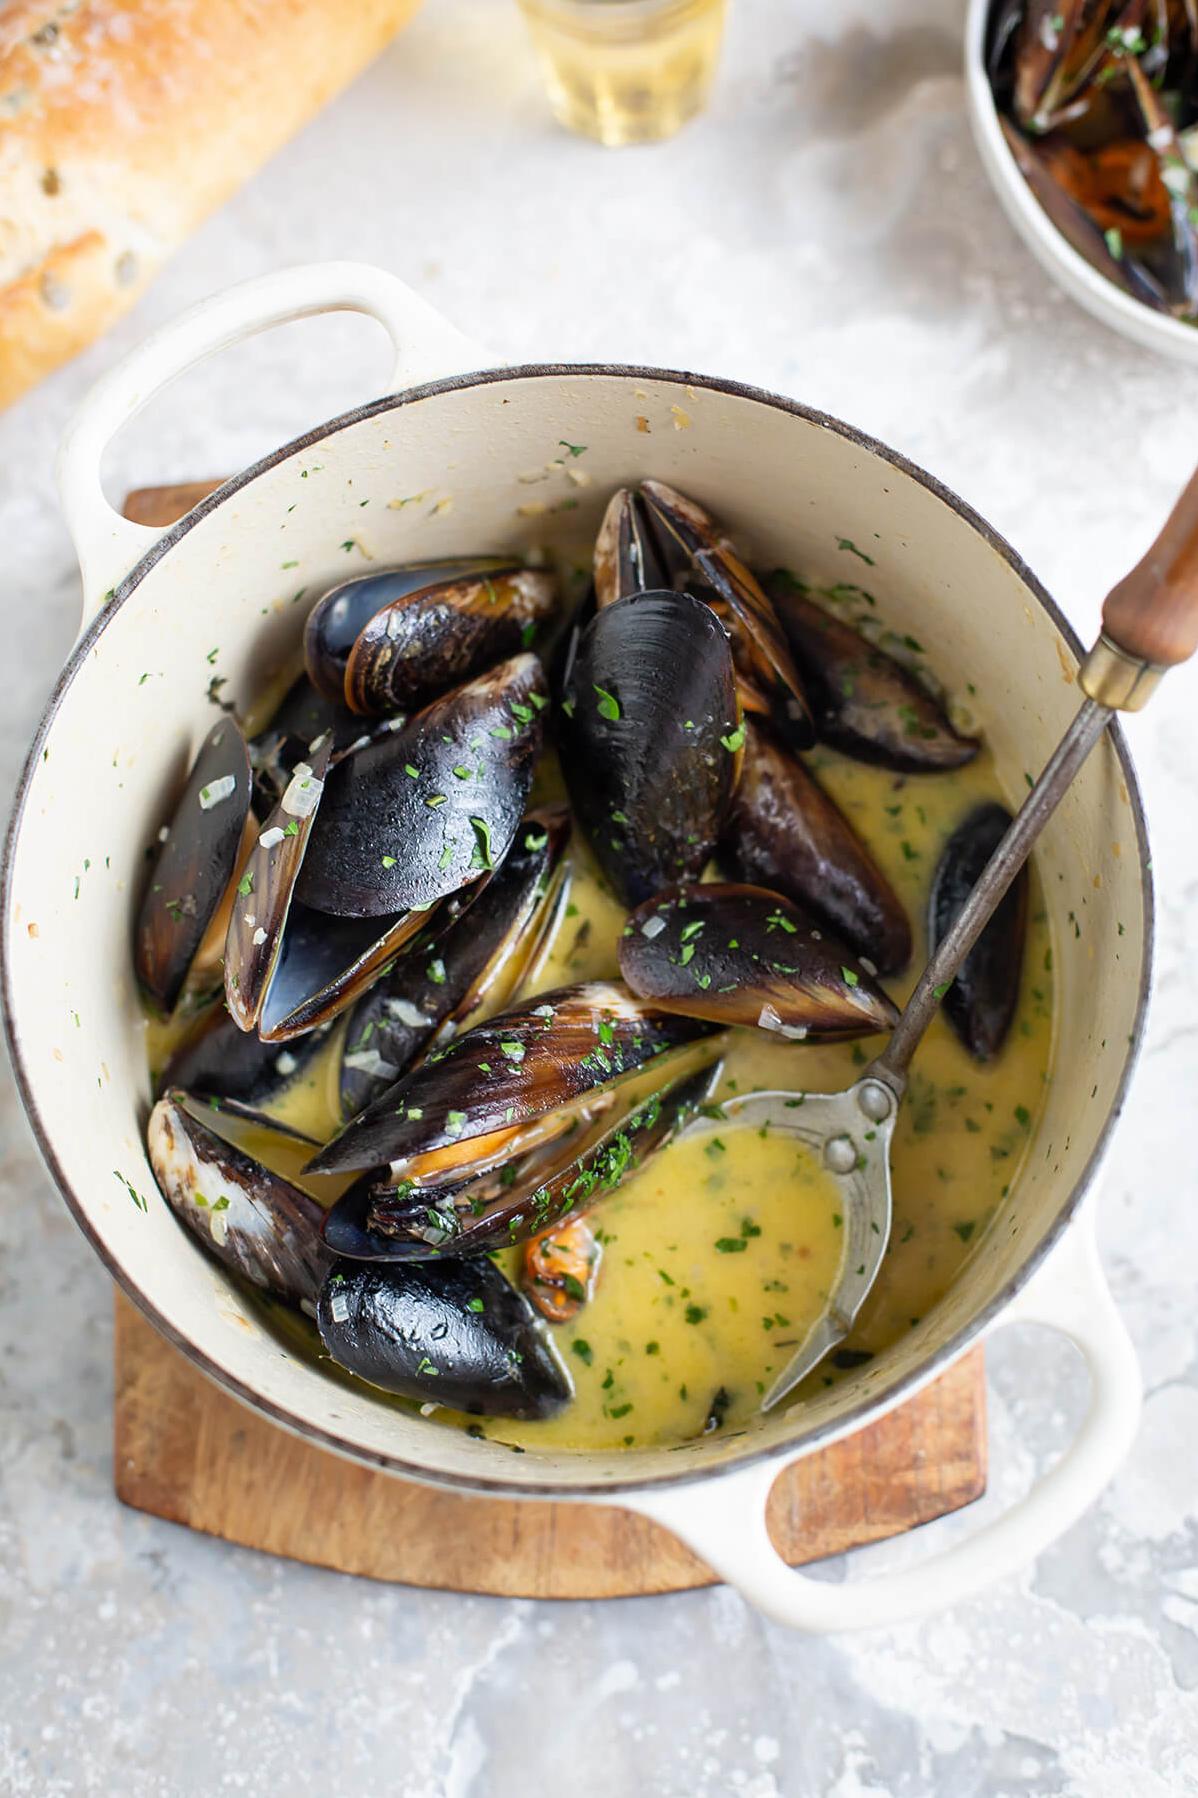  Mussels in wine and cream: the perfect combination of flavors